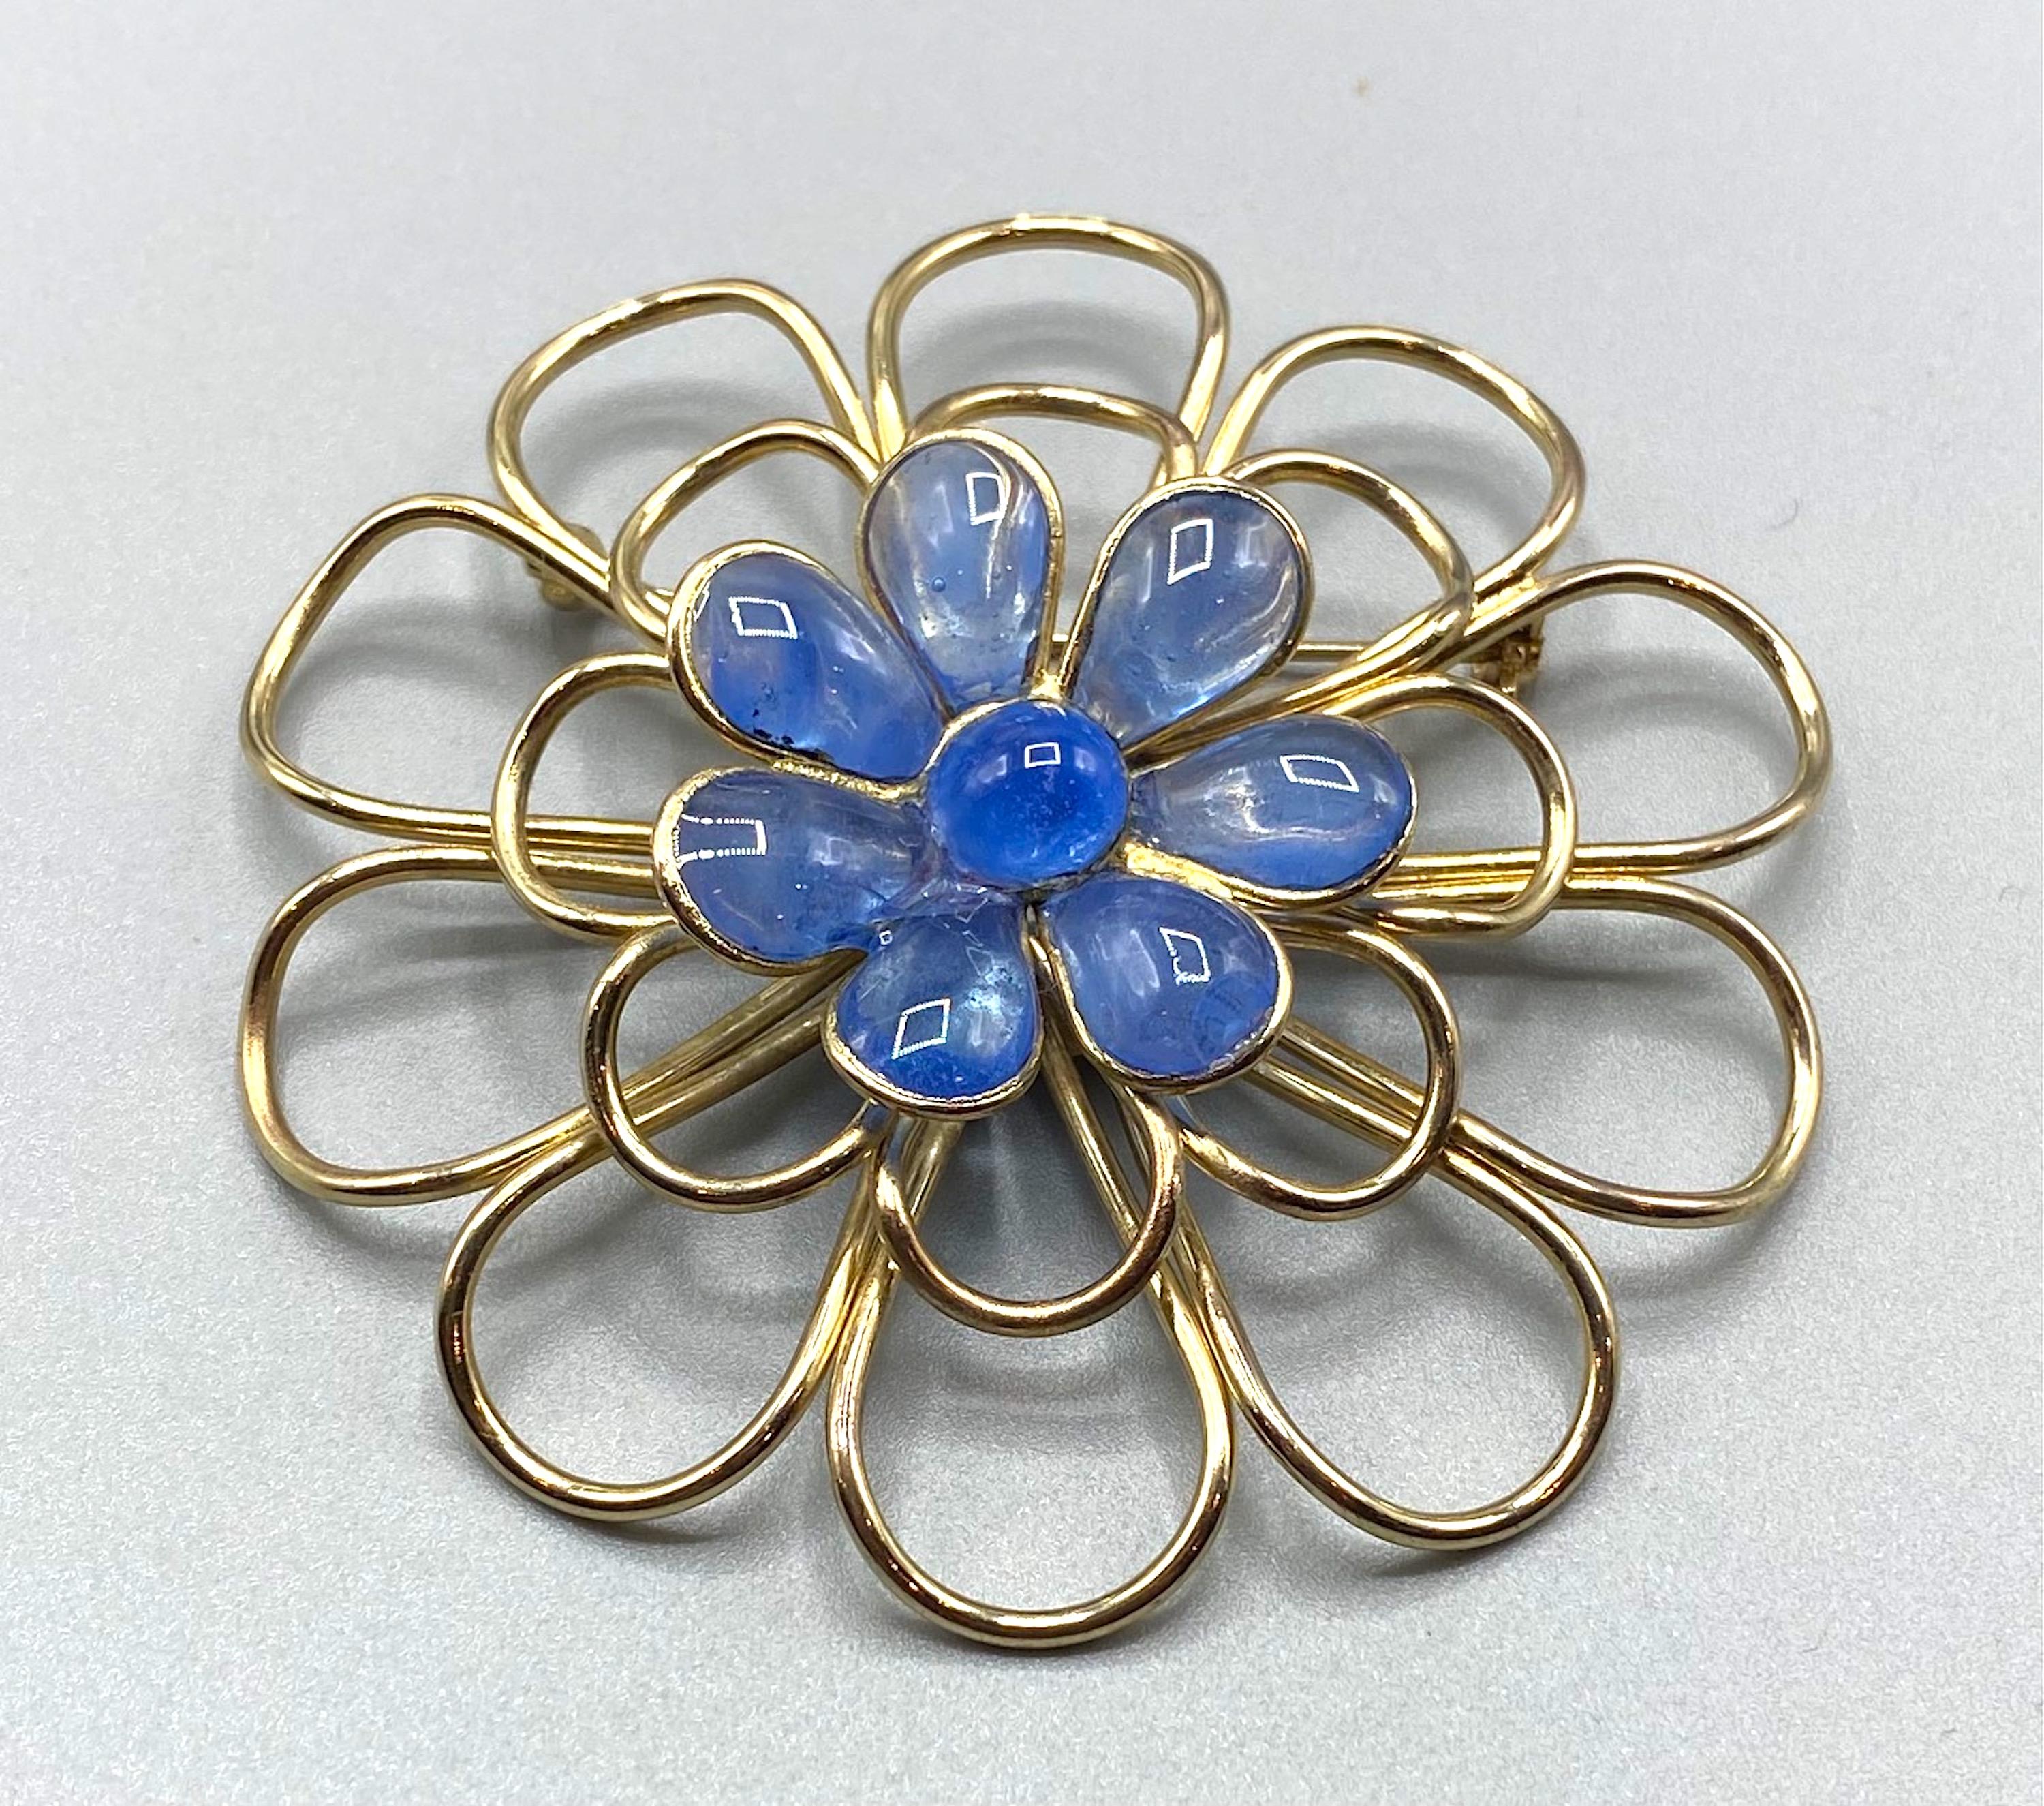 A very rare and elegant Flower Brooch , by famous company Gripoix of Paris, France. The design has a smaller gold plated wire flower with cured light blue glass petals inset into the larger back wire flower.  The light blue poured glass has